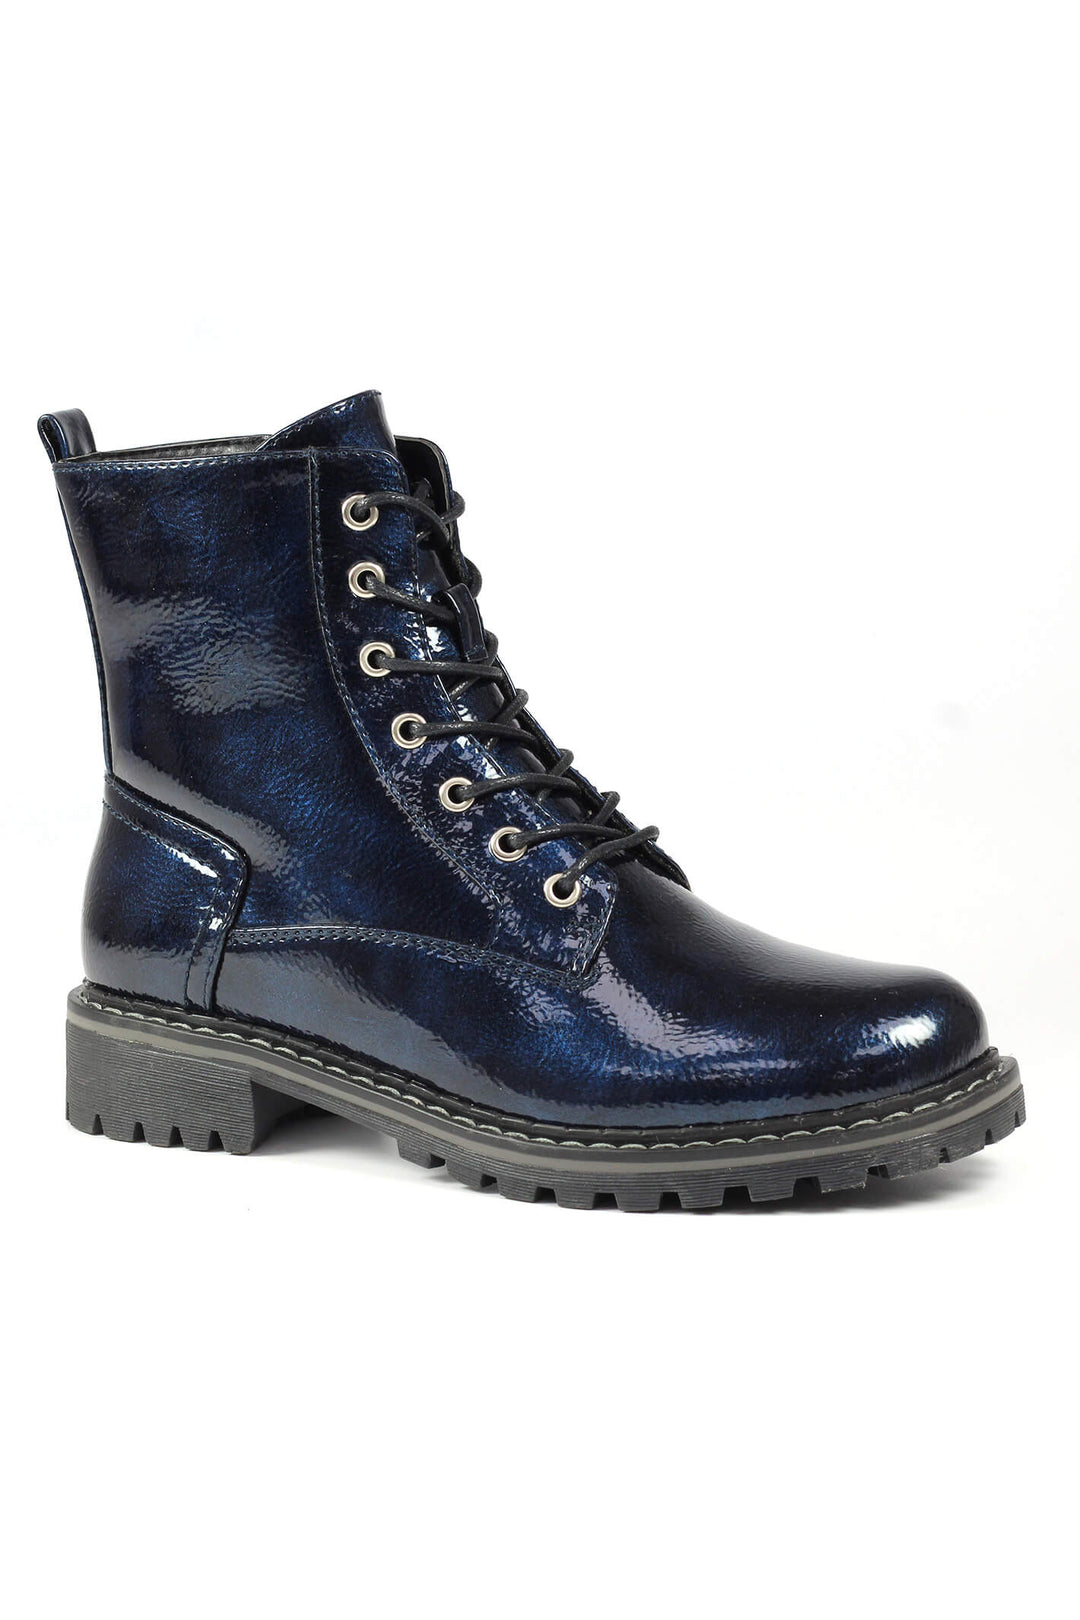 Lunar GLW011 Nala Navy Patent Boots - Experience Boutique